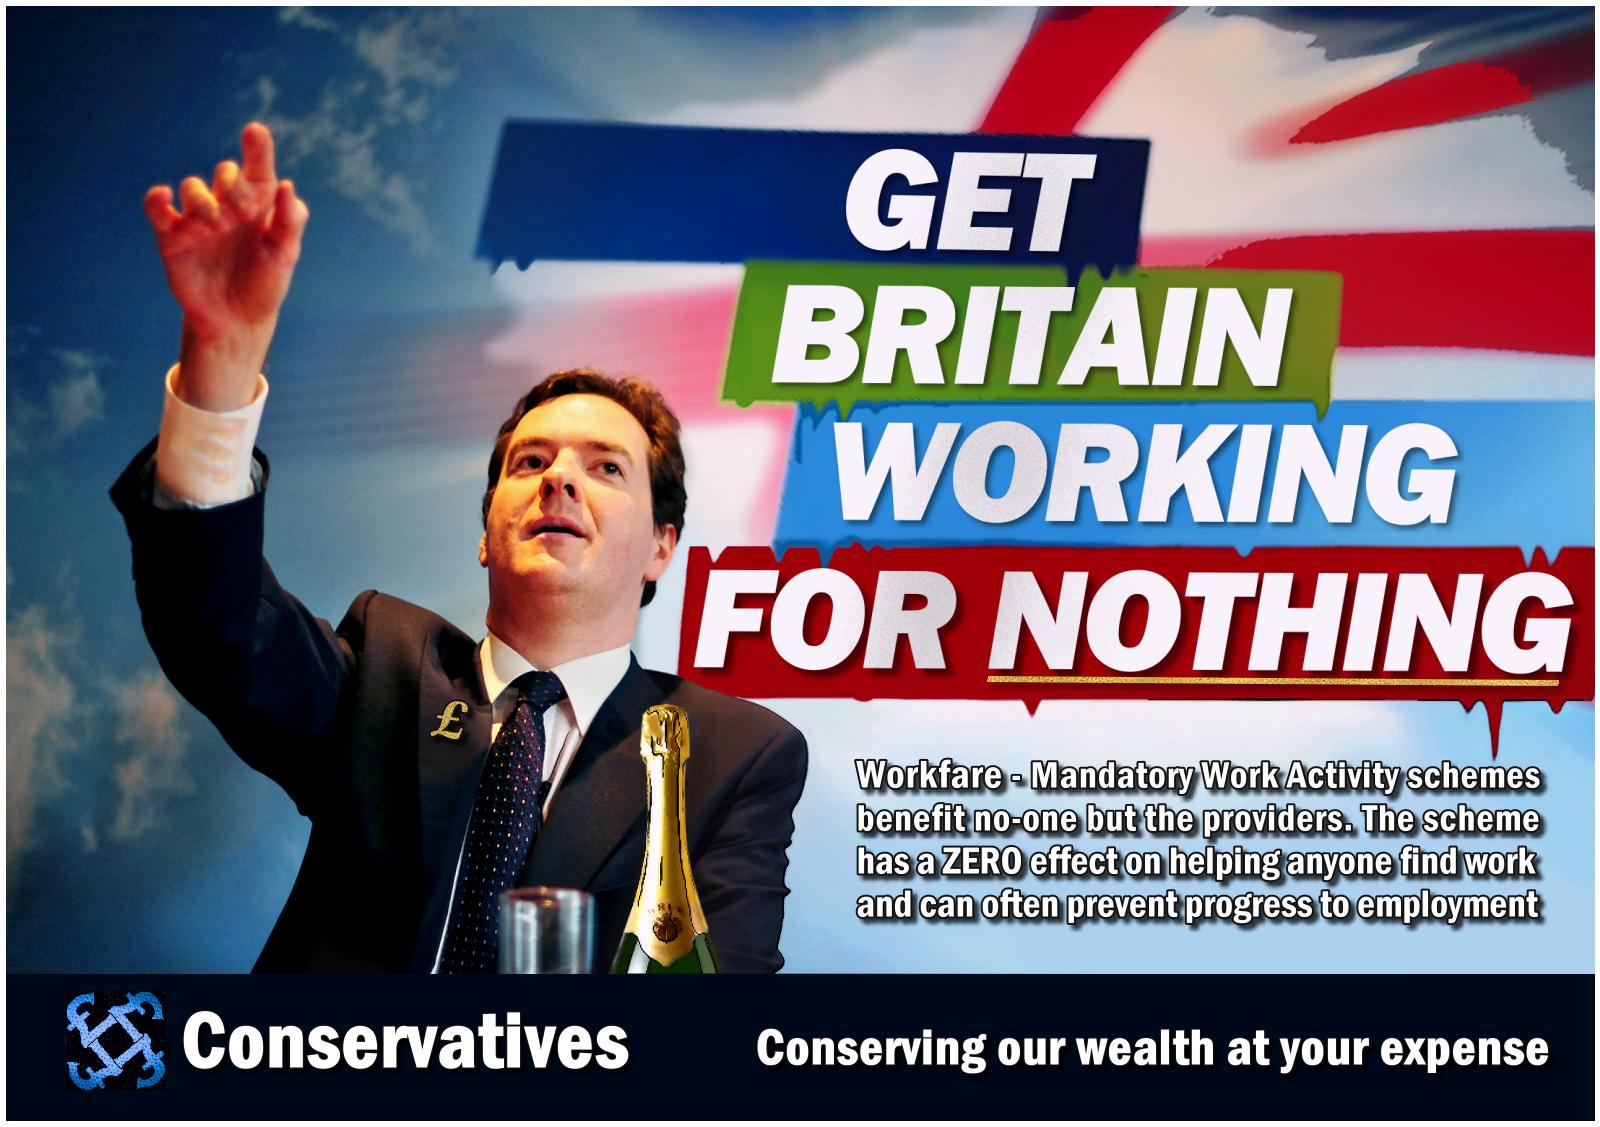 Get Britain Working for Nothing